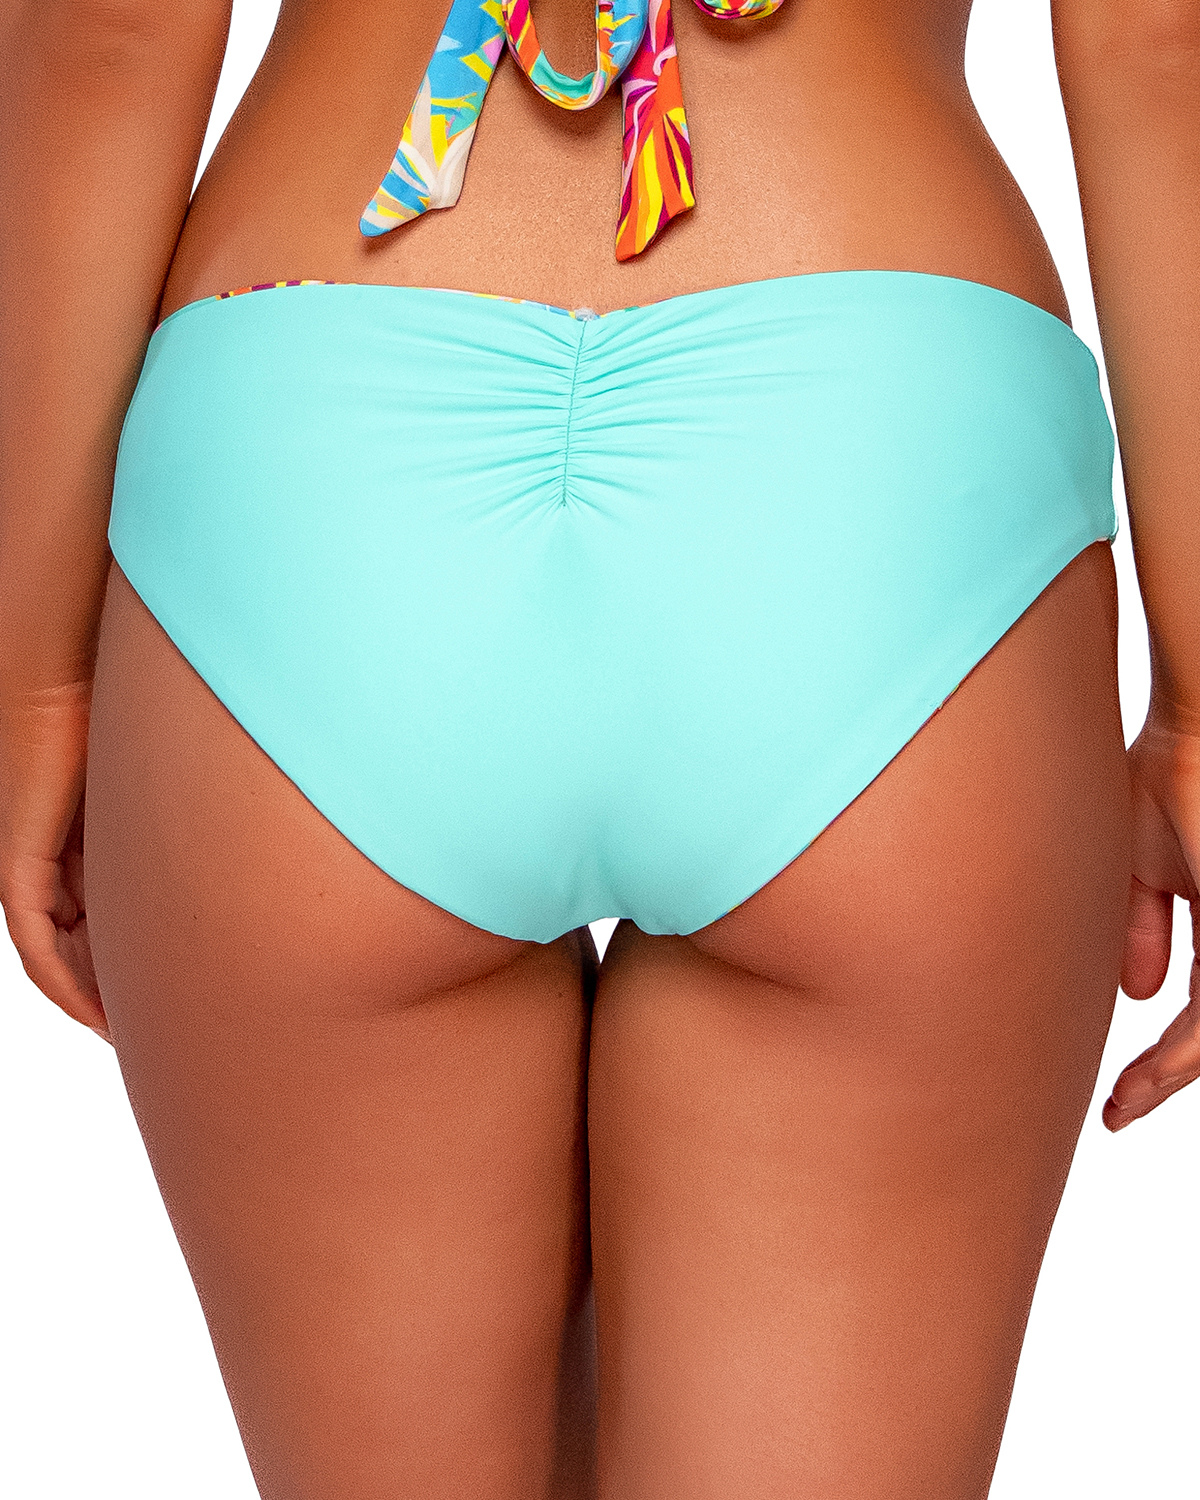 Model wearing a reversible hipster bikini bottom in a orange, yellow, turquoise and pink floral print. Bottom reverses to solid turquoise. 